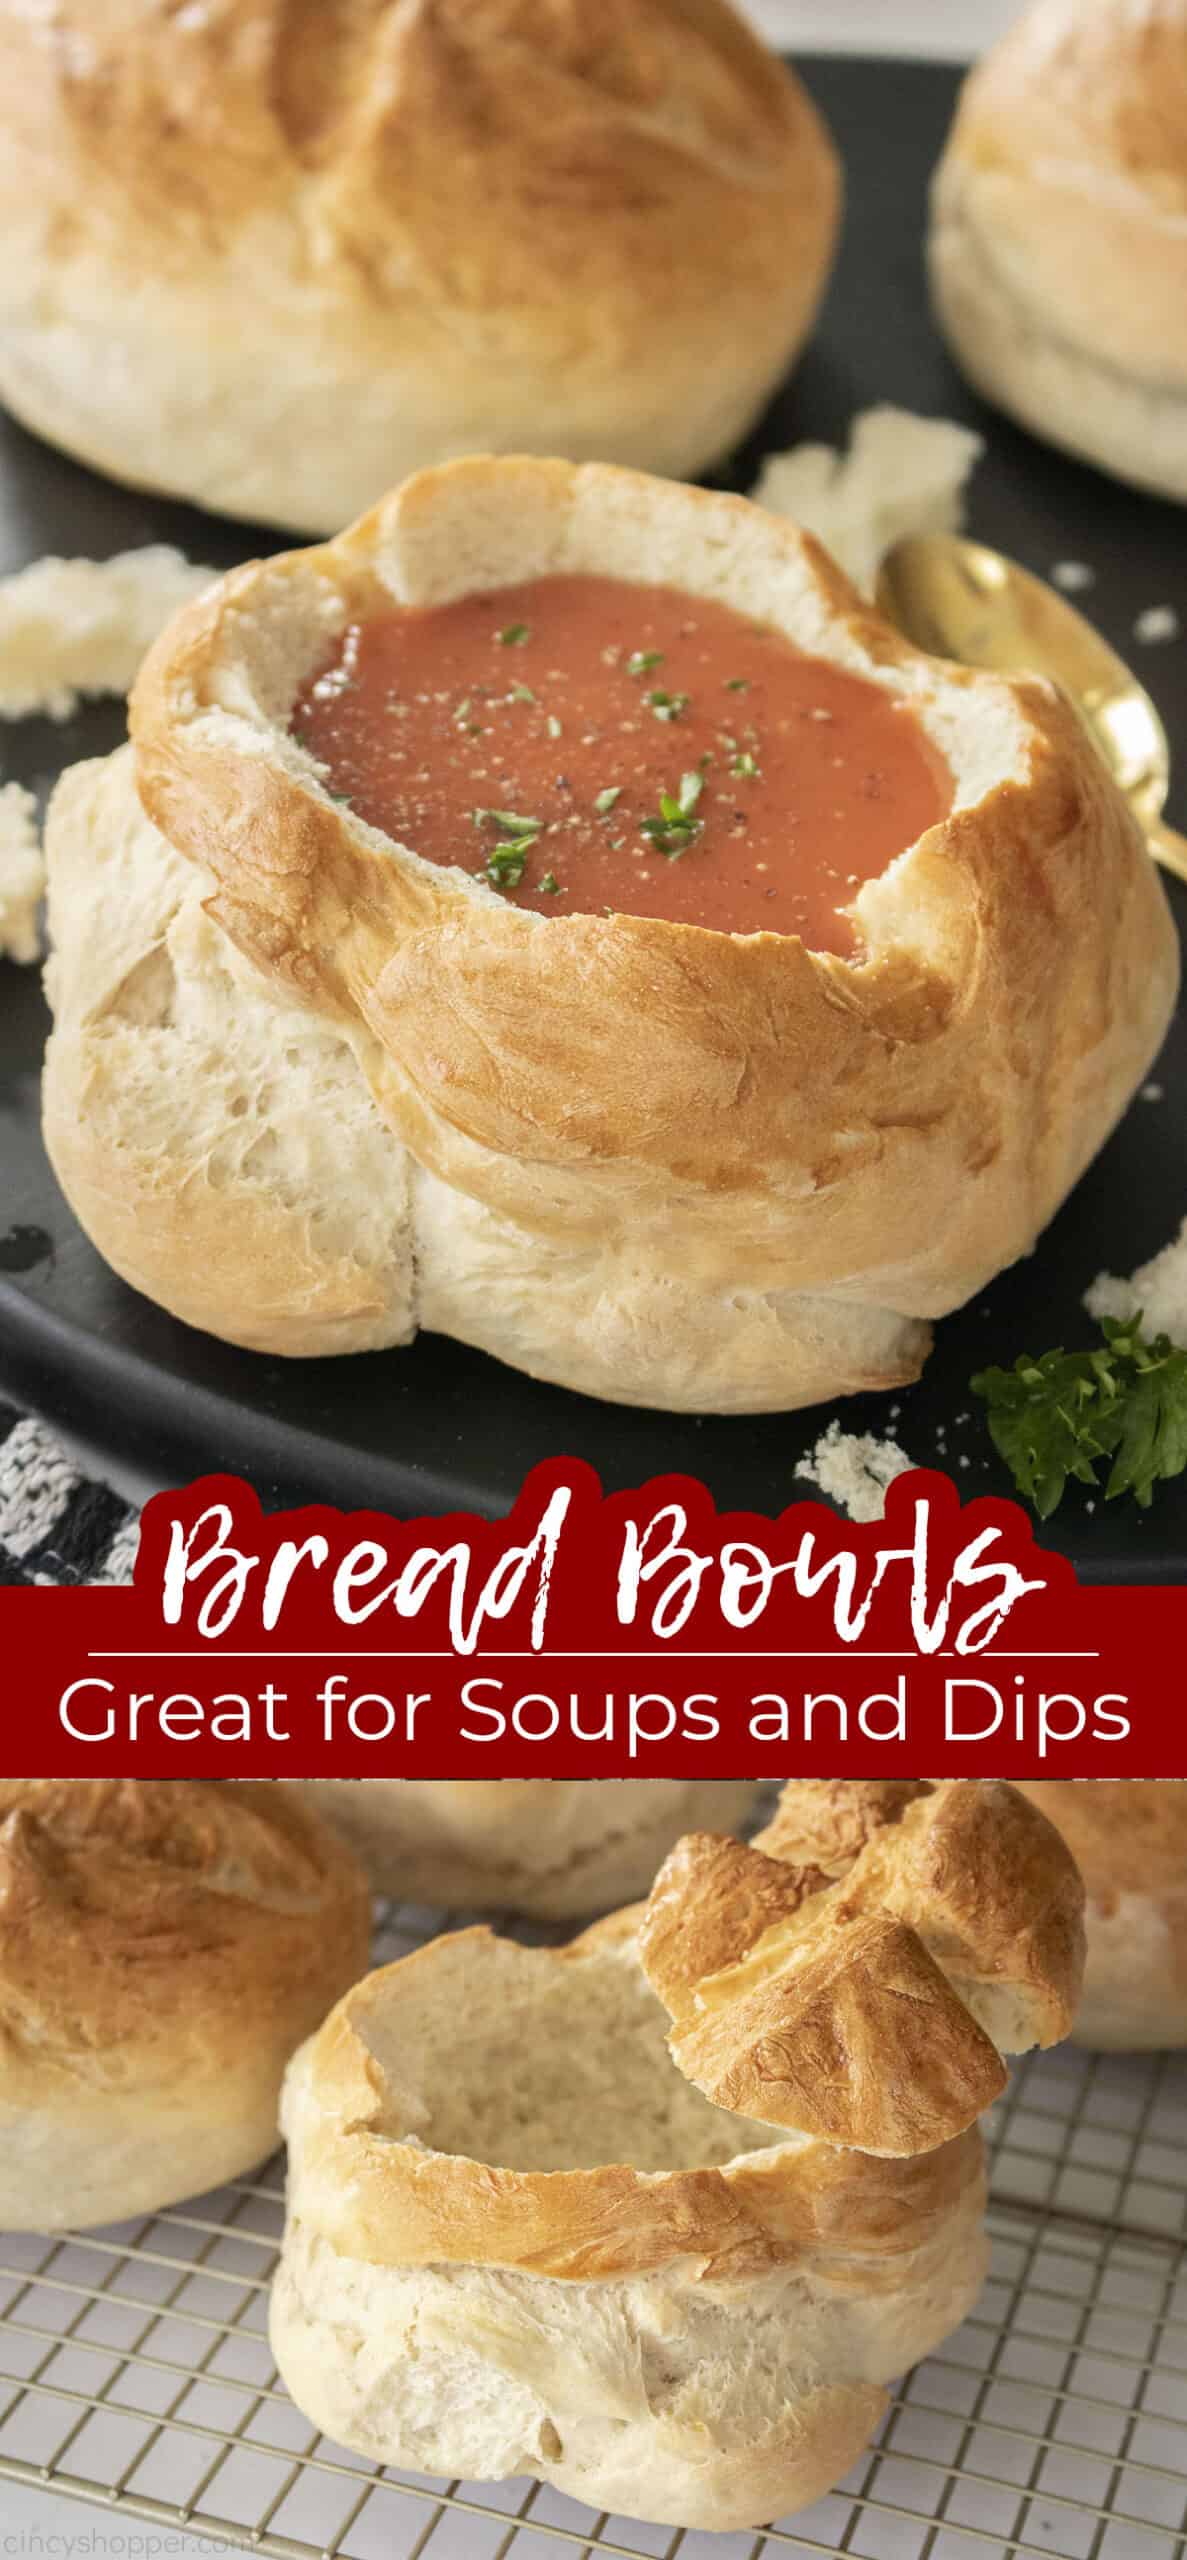 Long pin Text on image Bread Bowls Great for Soups and Dips